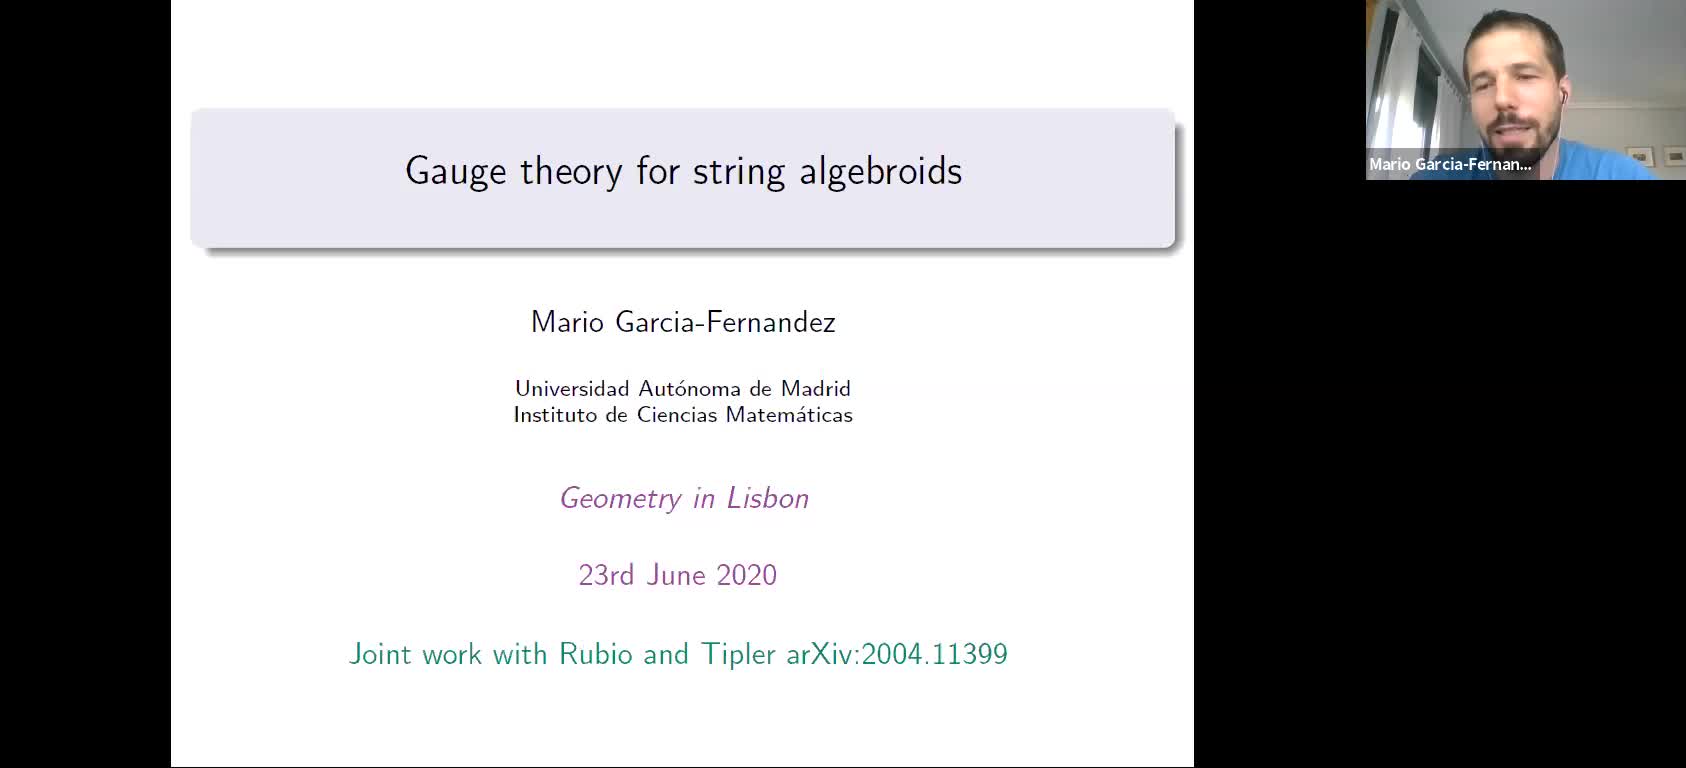 2020.06.23 Gauge theory for string algebroids